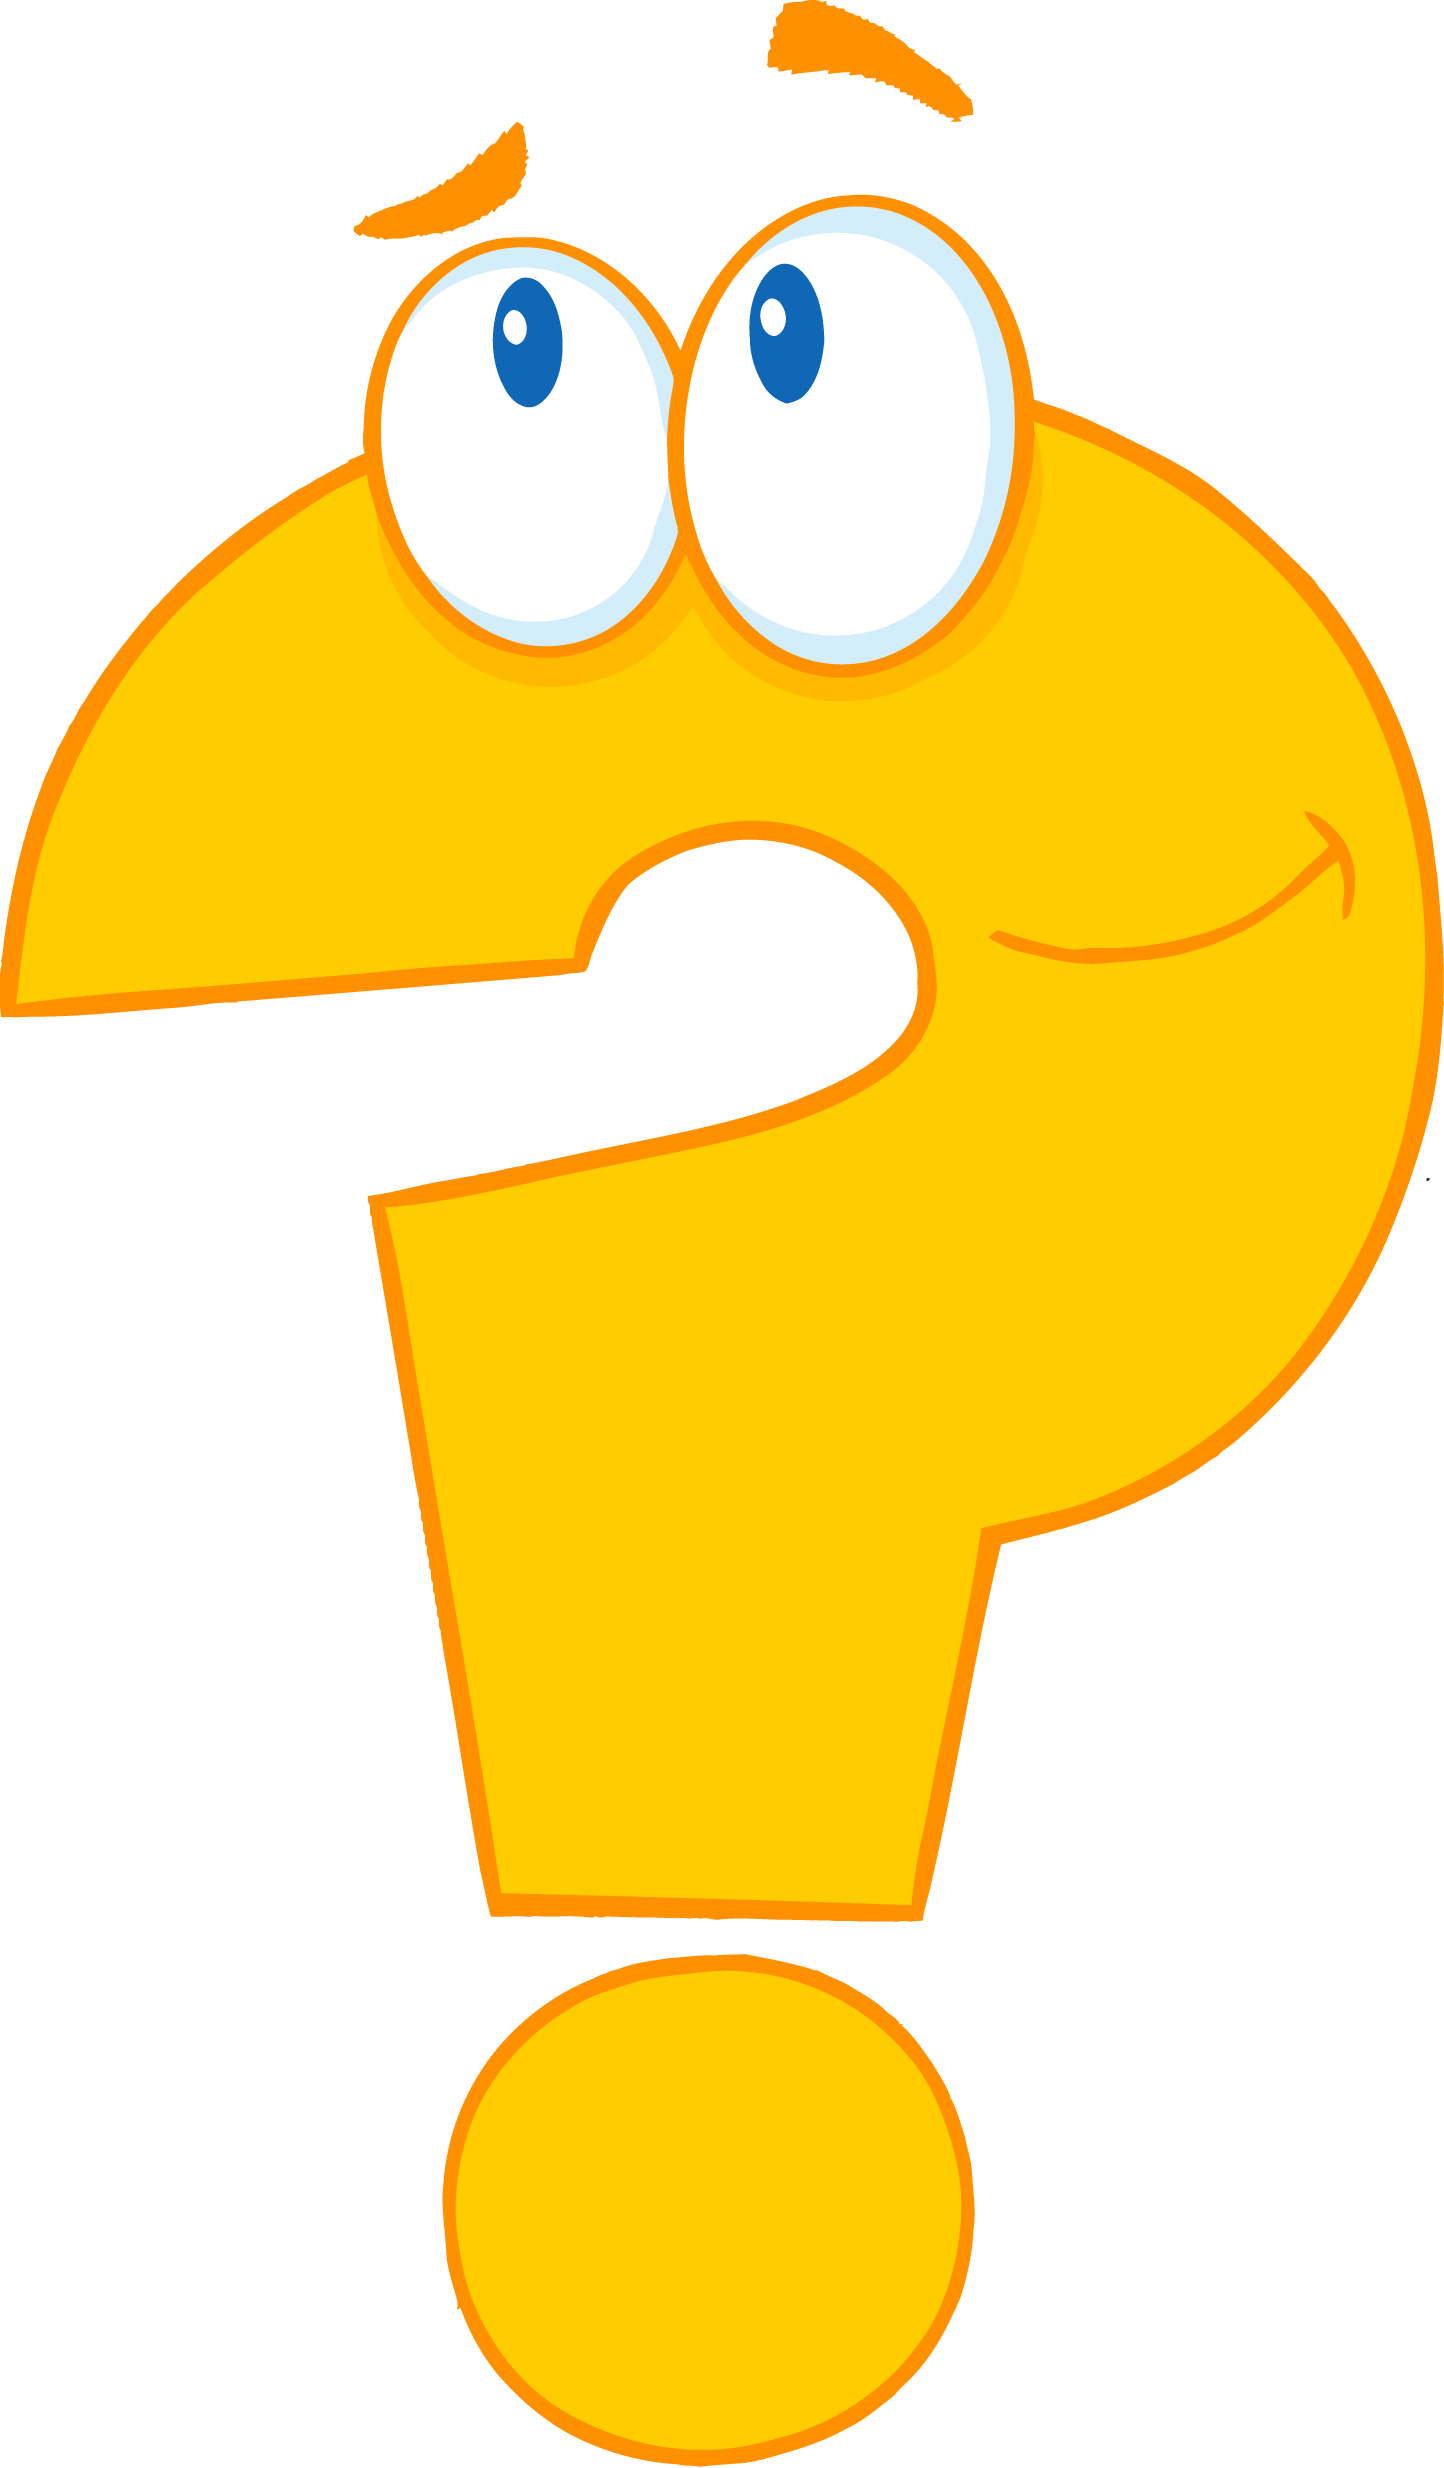 Images For > Question Mark Cartoon